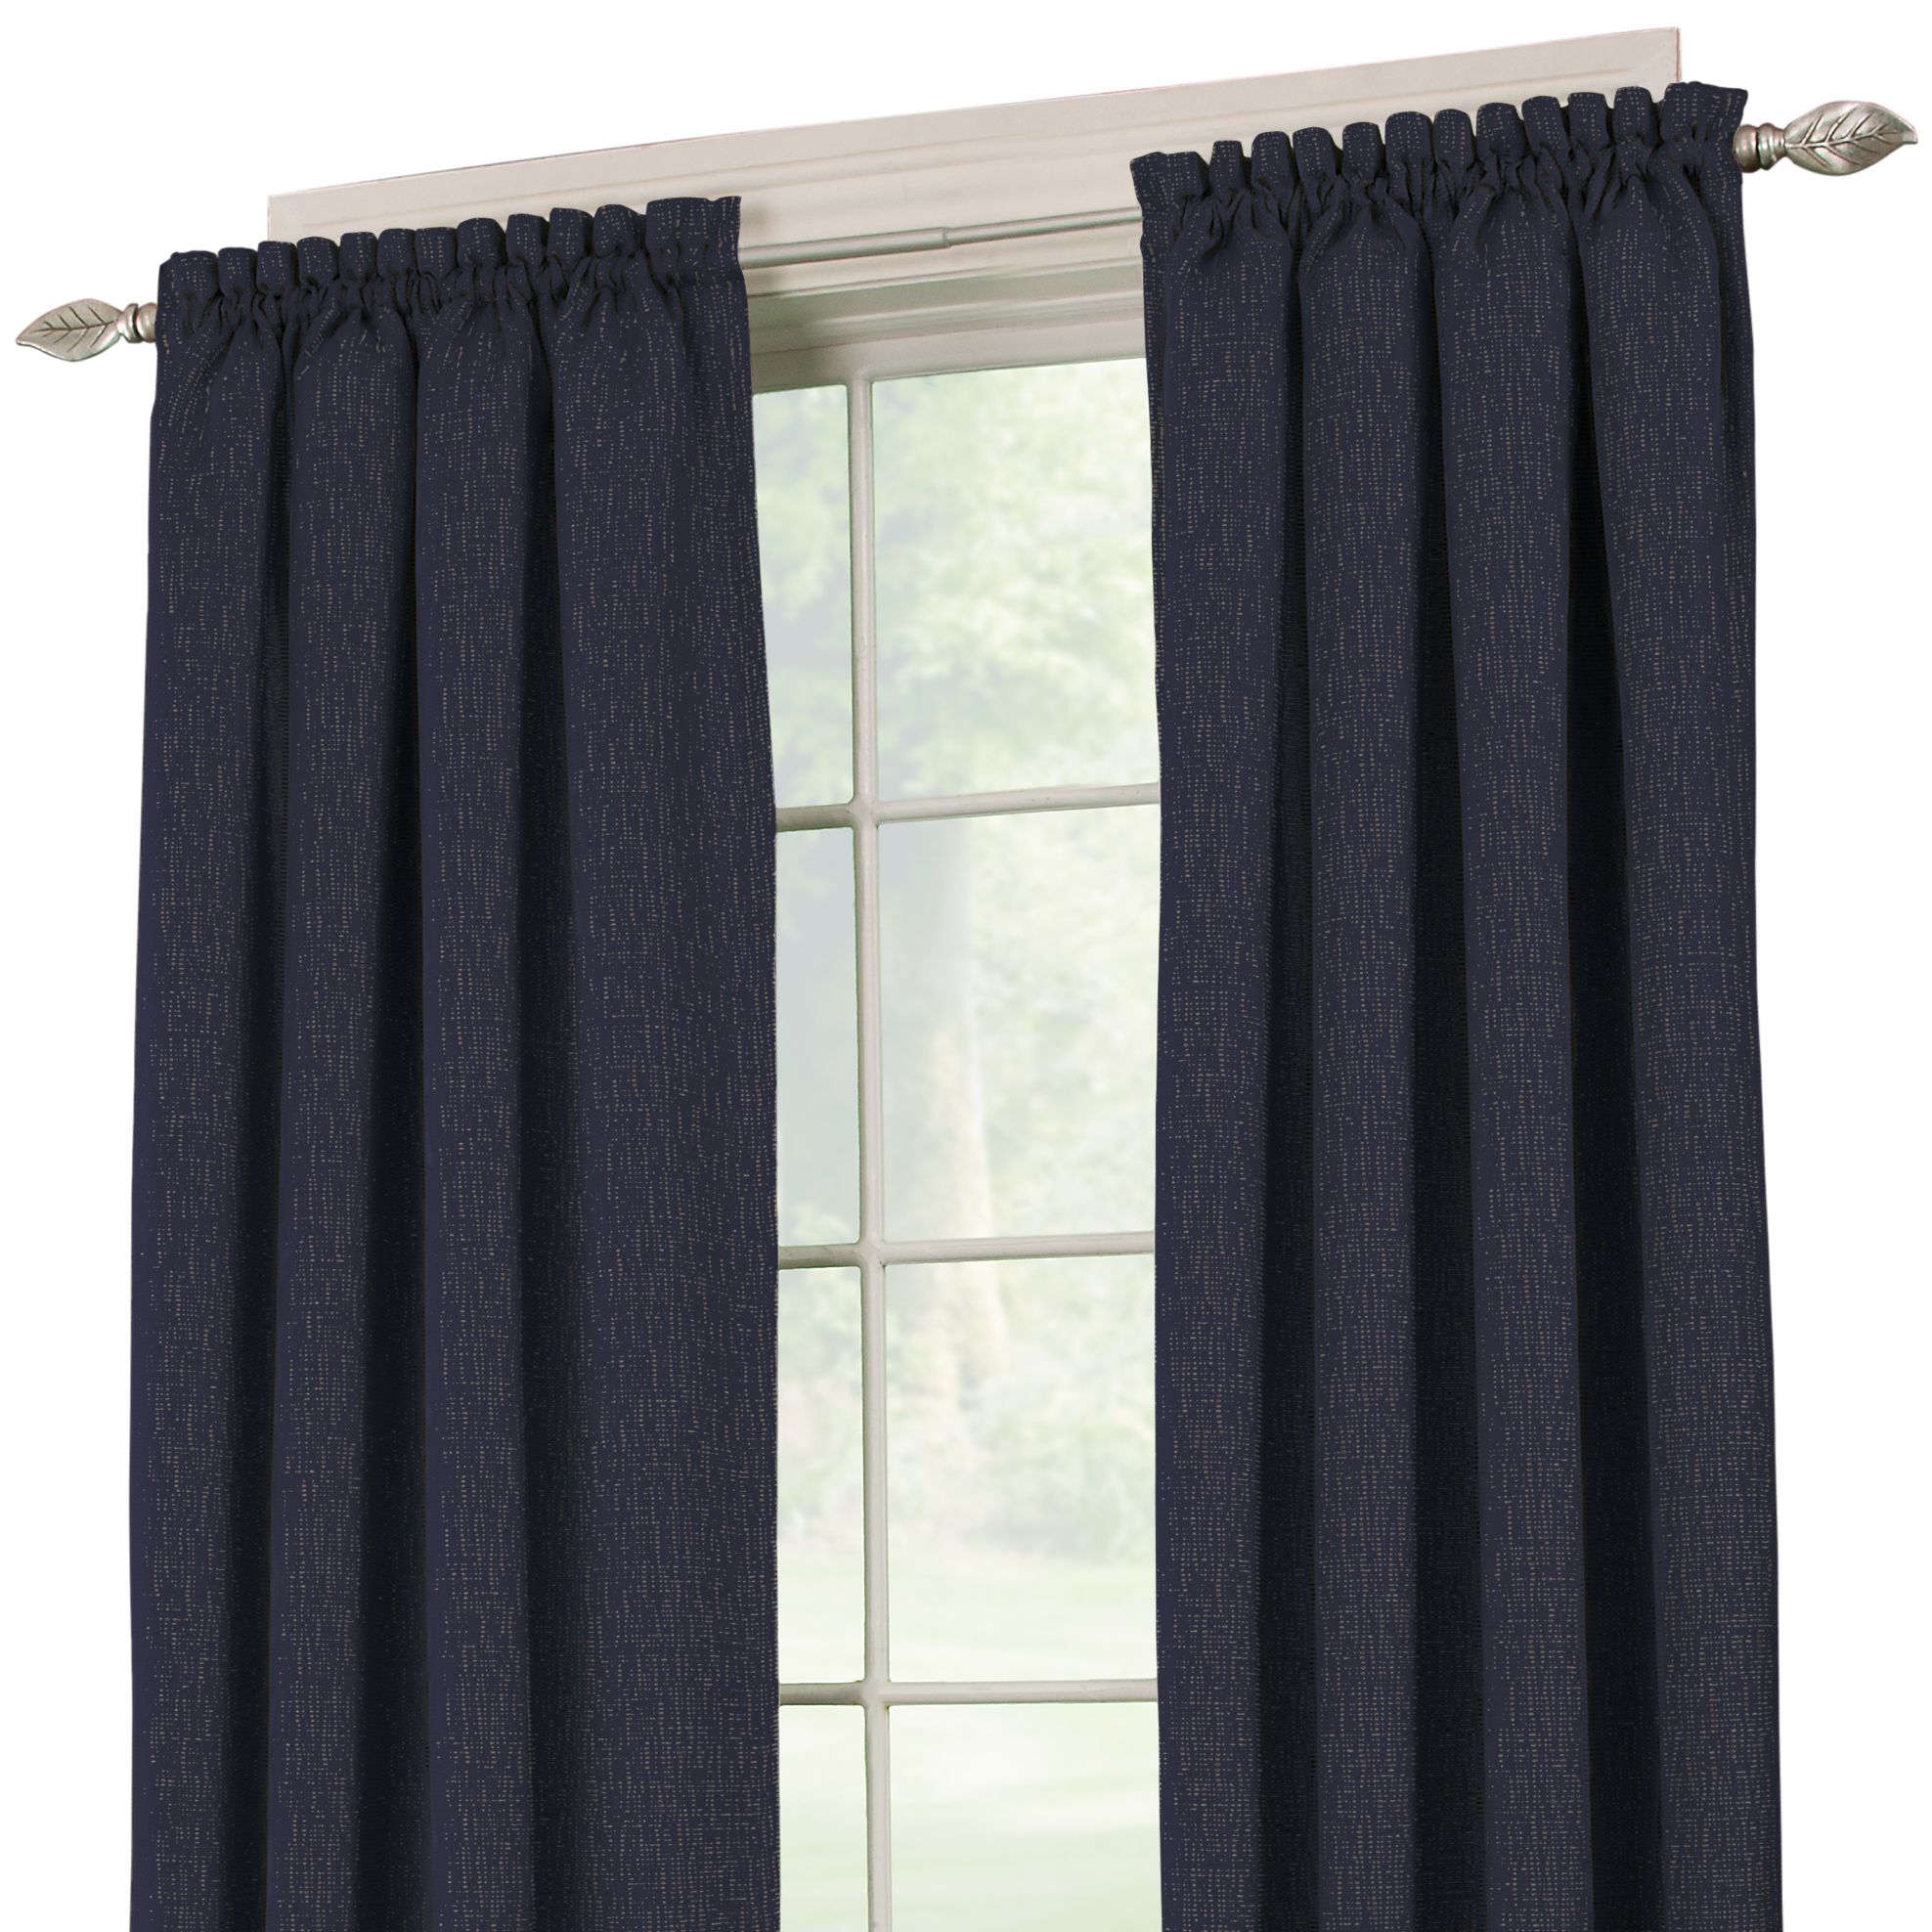 Essential Home Jacquard Textured Panel - Navy